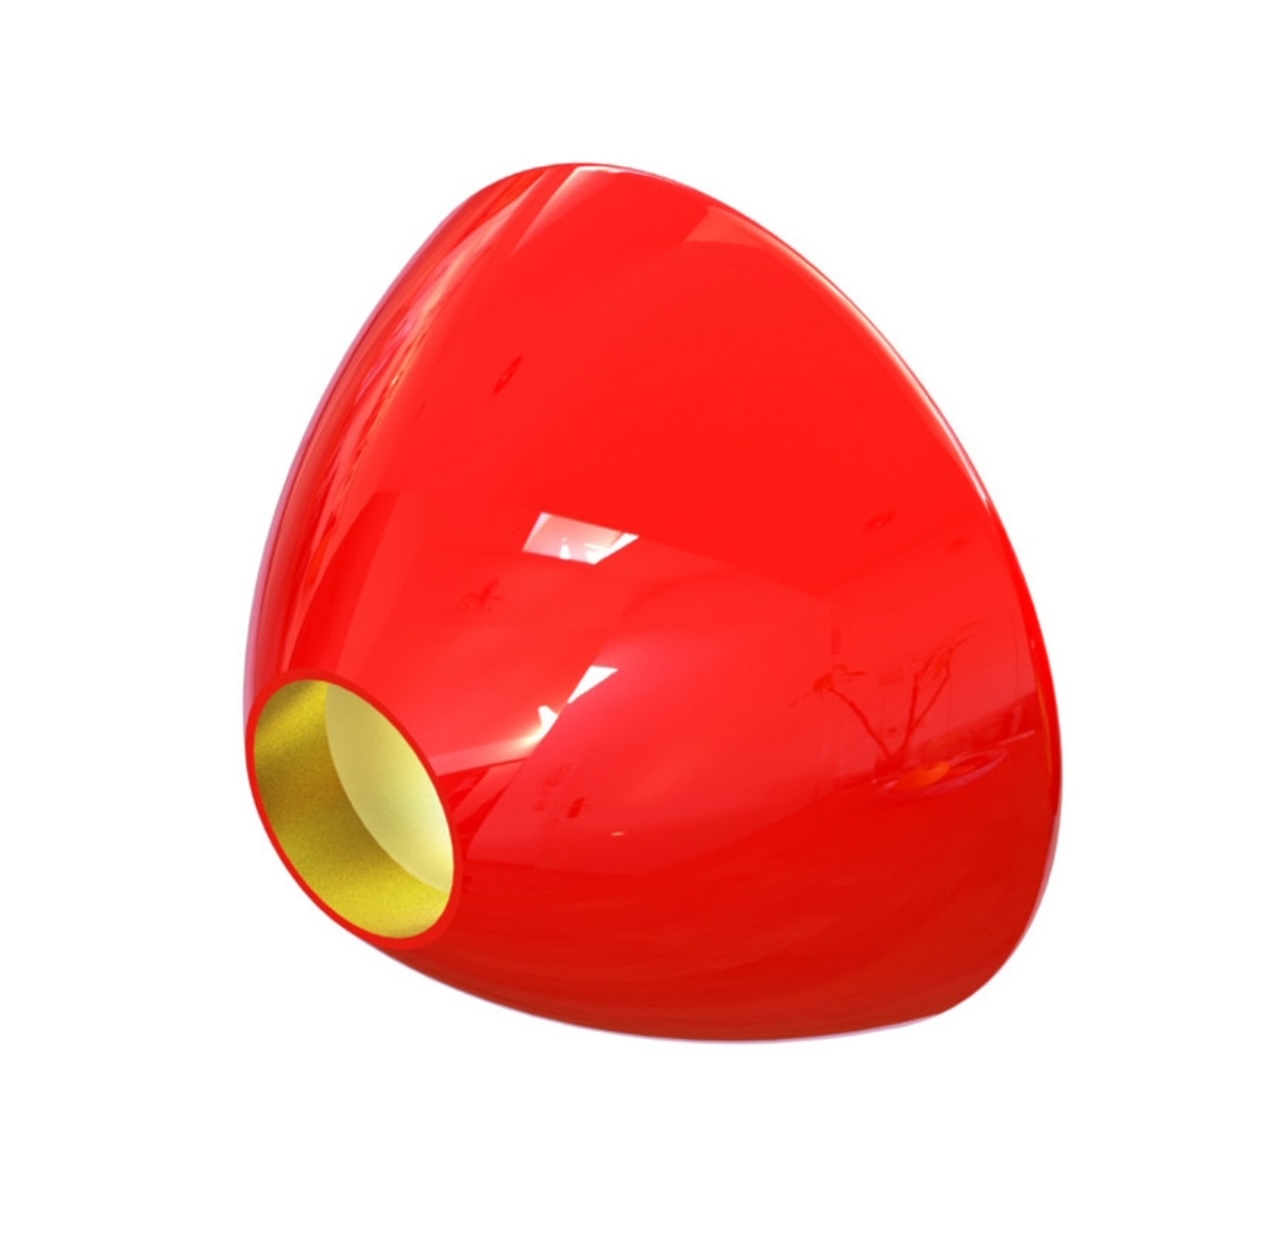 Pro Sportfisher Conehead - Large - Red